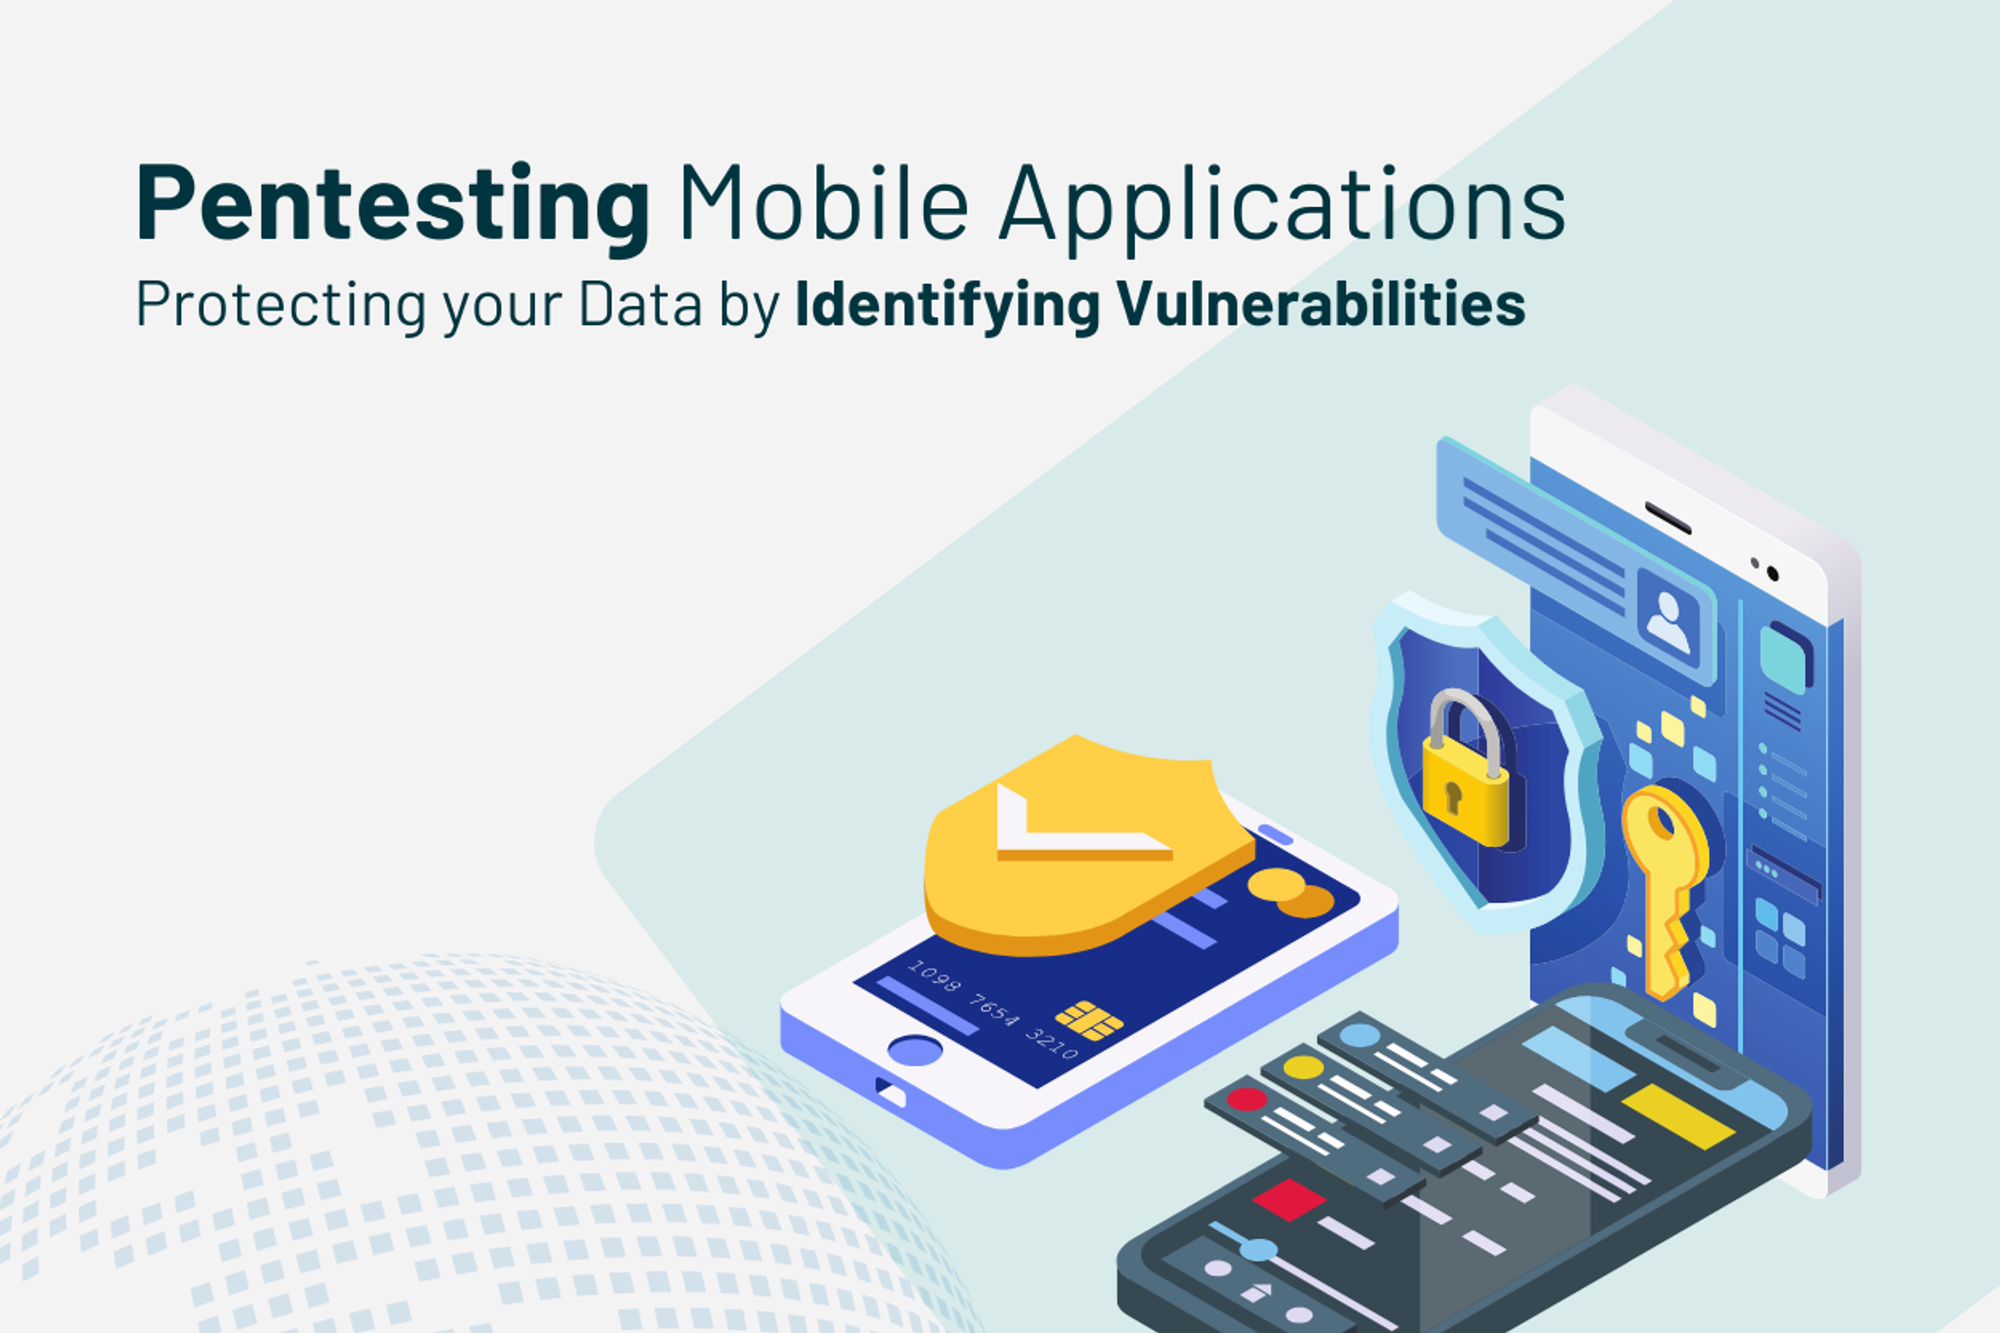 Pentesting Mobile Applications: Protecting your Data by Identifying Vulnerabilities